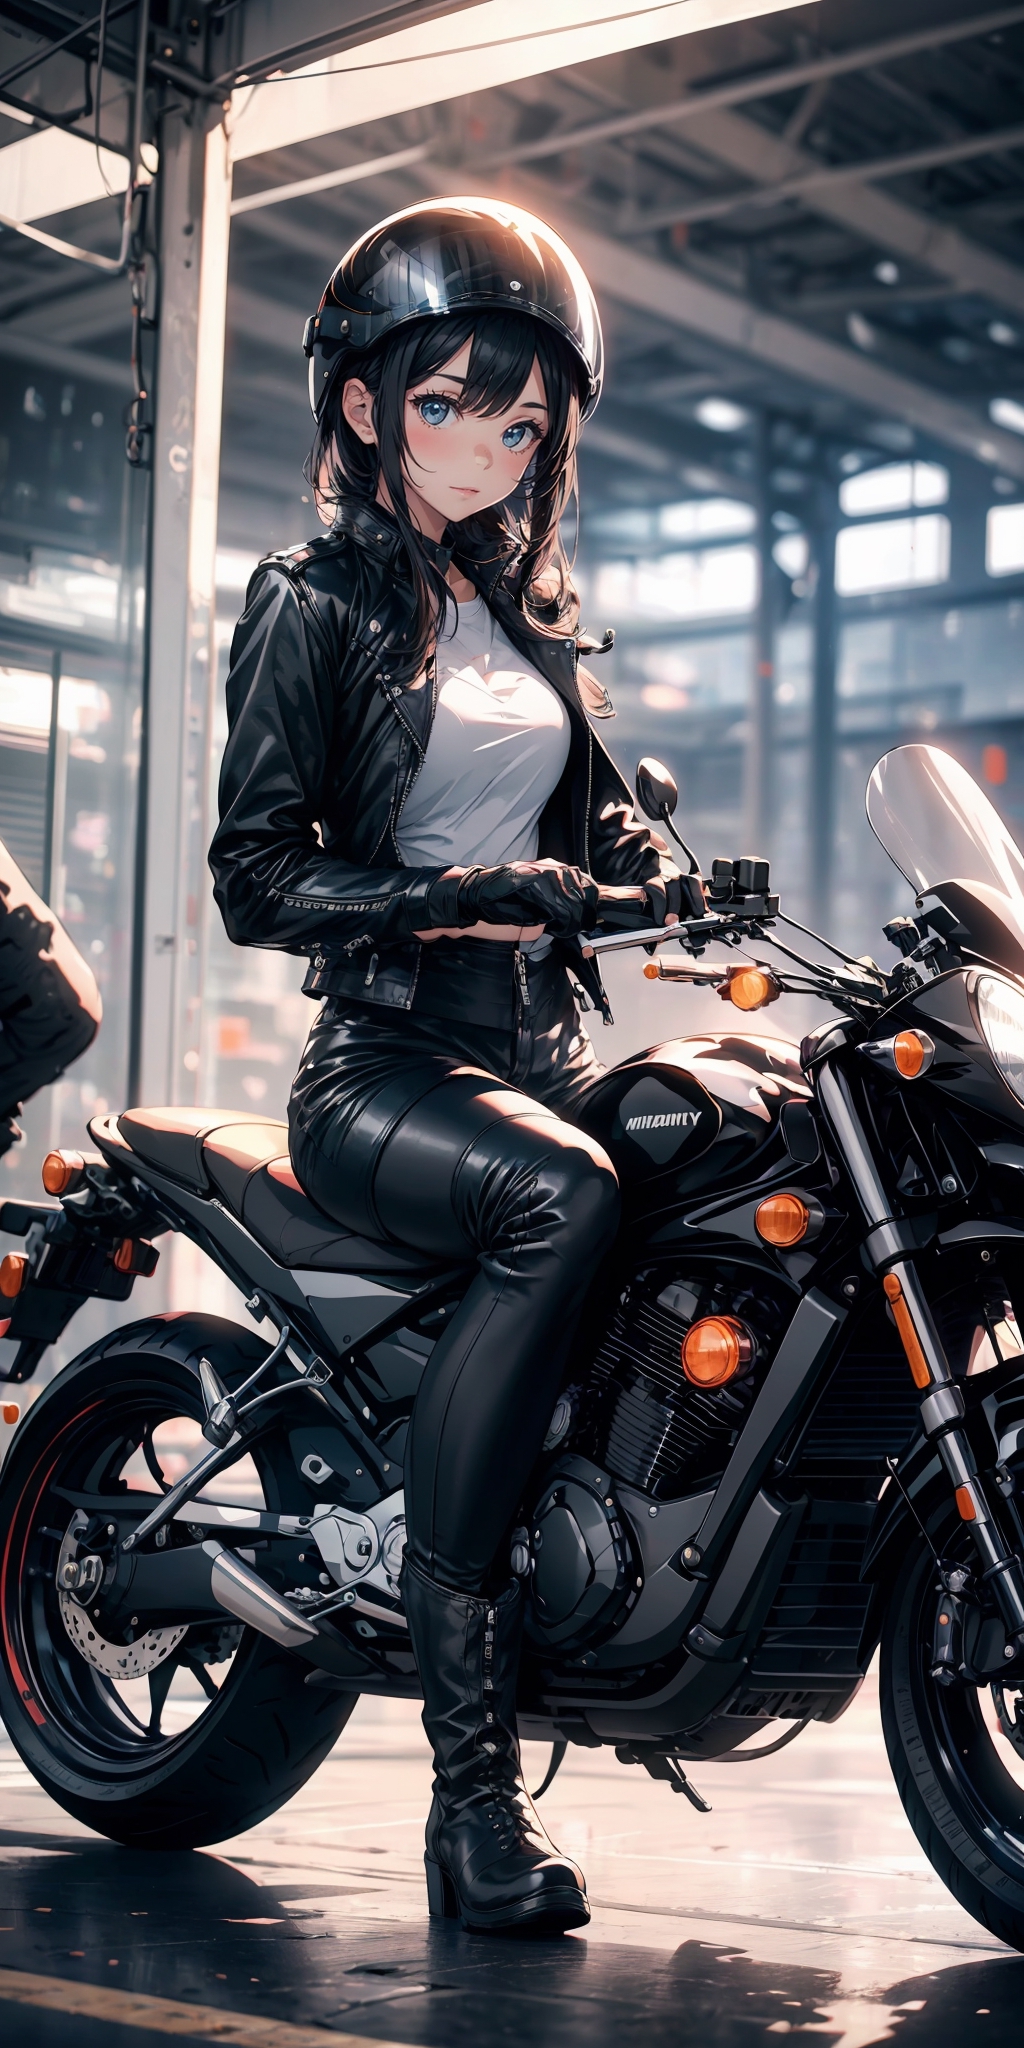 Anime girl with motorcycle wallpaper - backiee